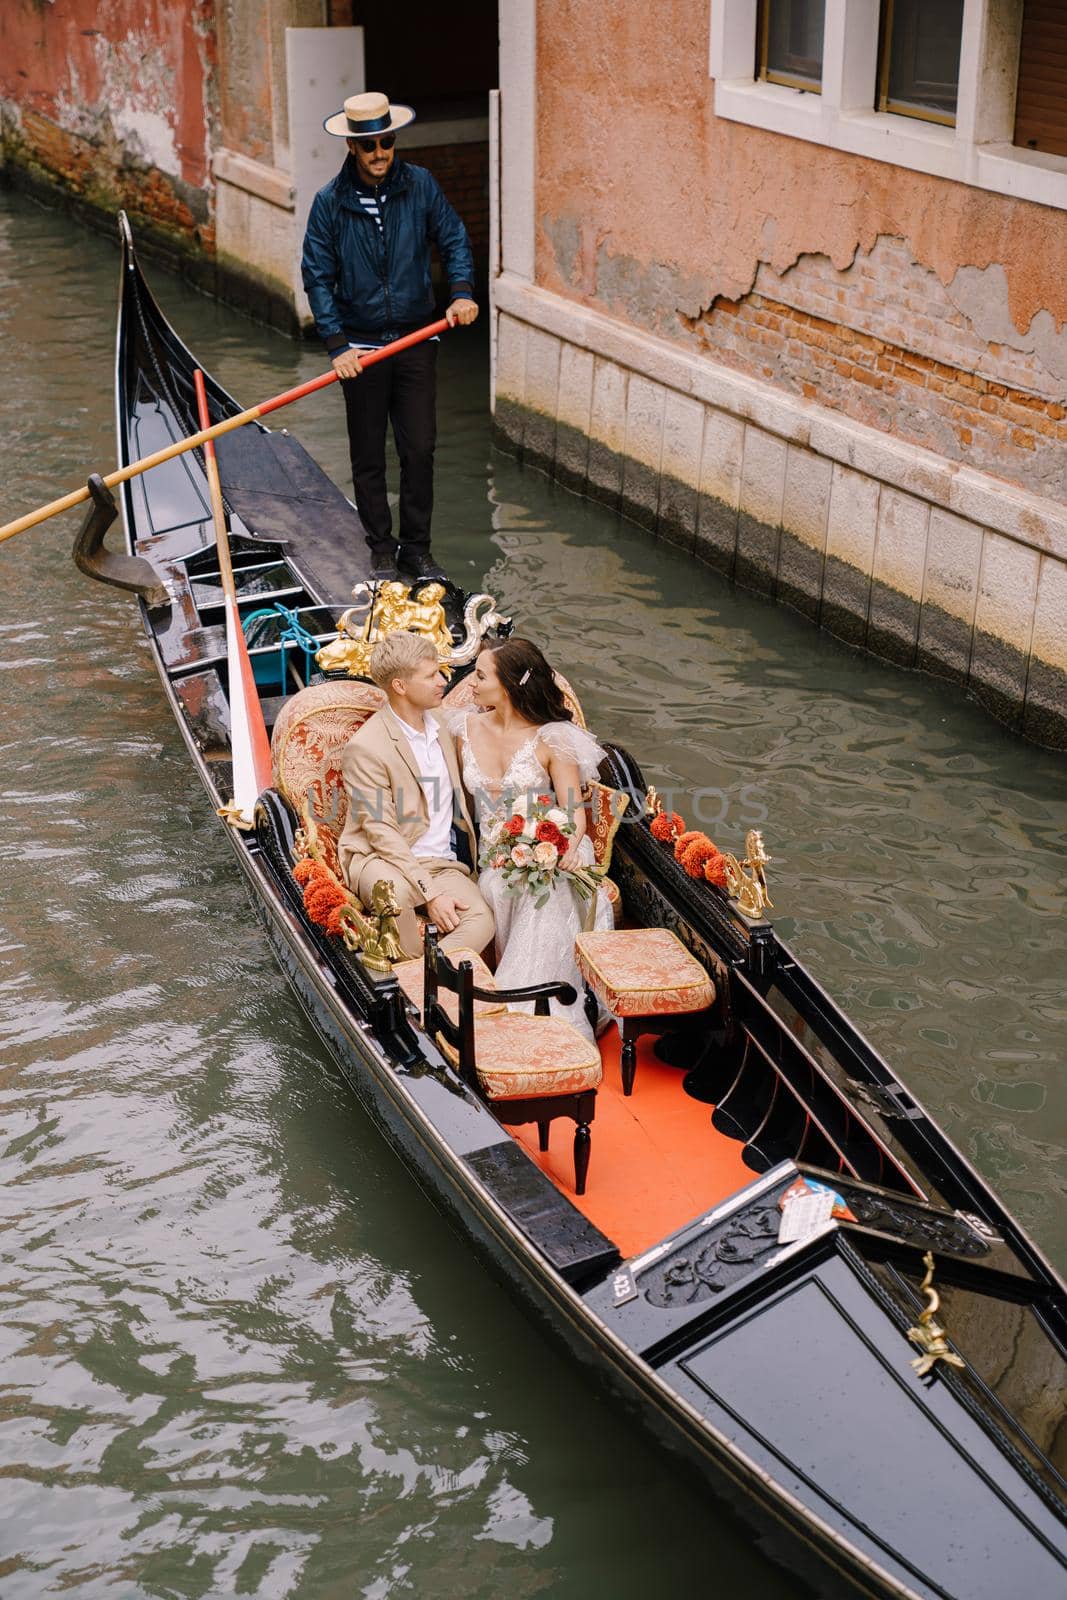 Venice, Italy - 04 october 2019: Italy wedding in Venice. A gondolier rolls a bride and groom in classic wooden gondola along a narrow Venetian canal. Newlyweds are sitting in a boat and want to kiss. by Nadtochiy